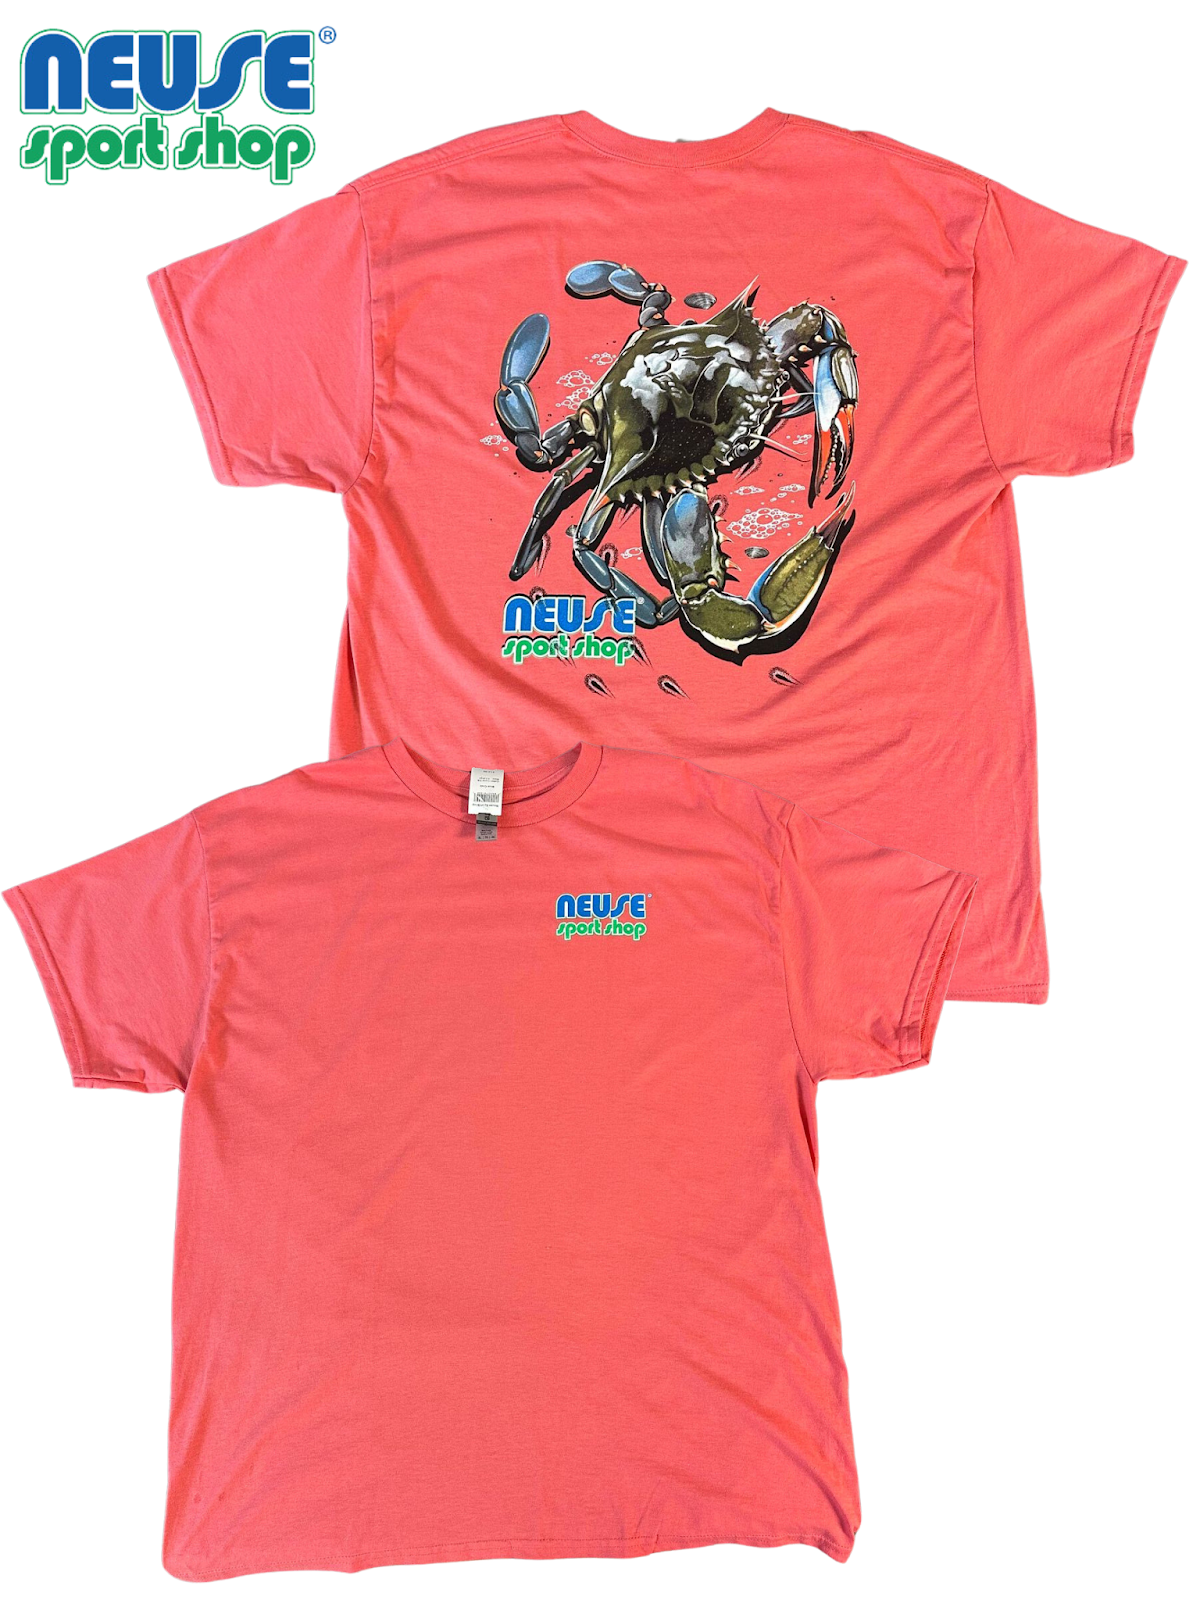 Neuse Sport Shop Blue Crab Short Sleeve Tee with NO Front Pocket Coral